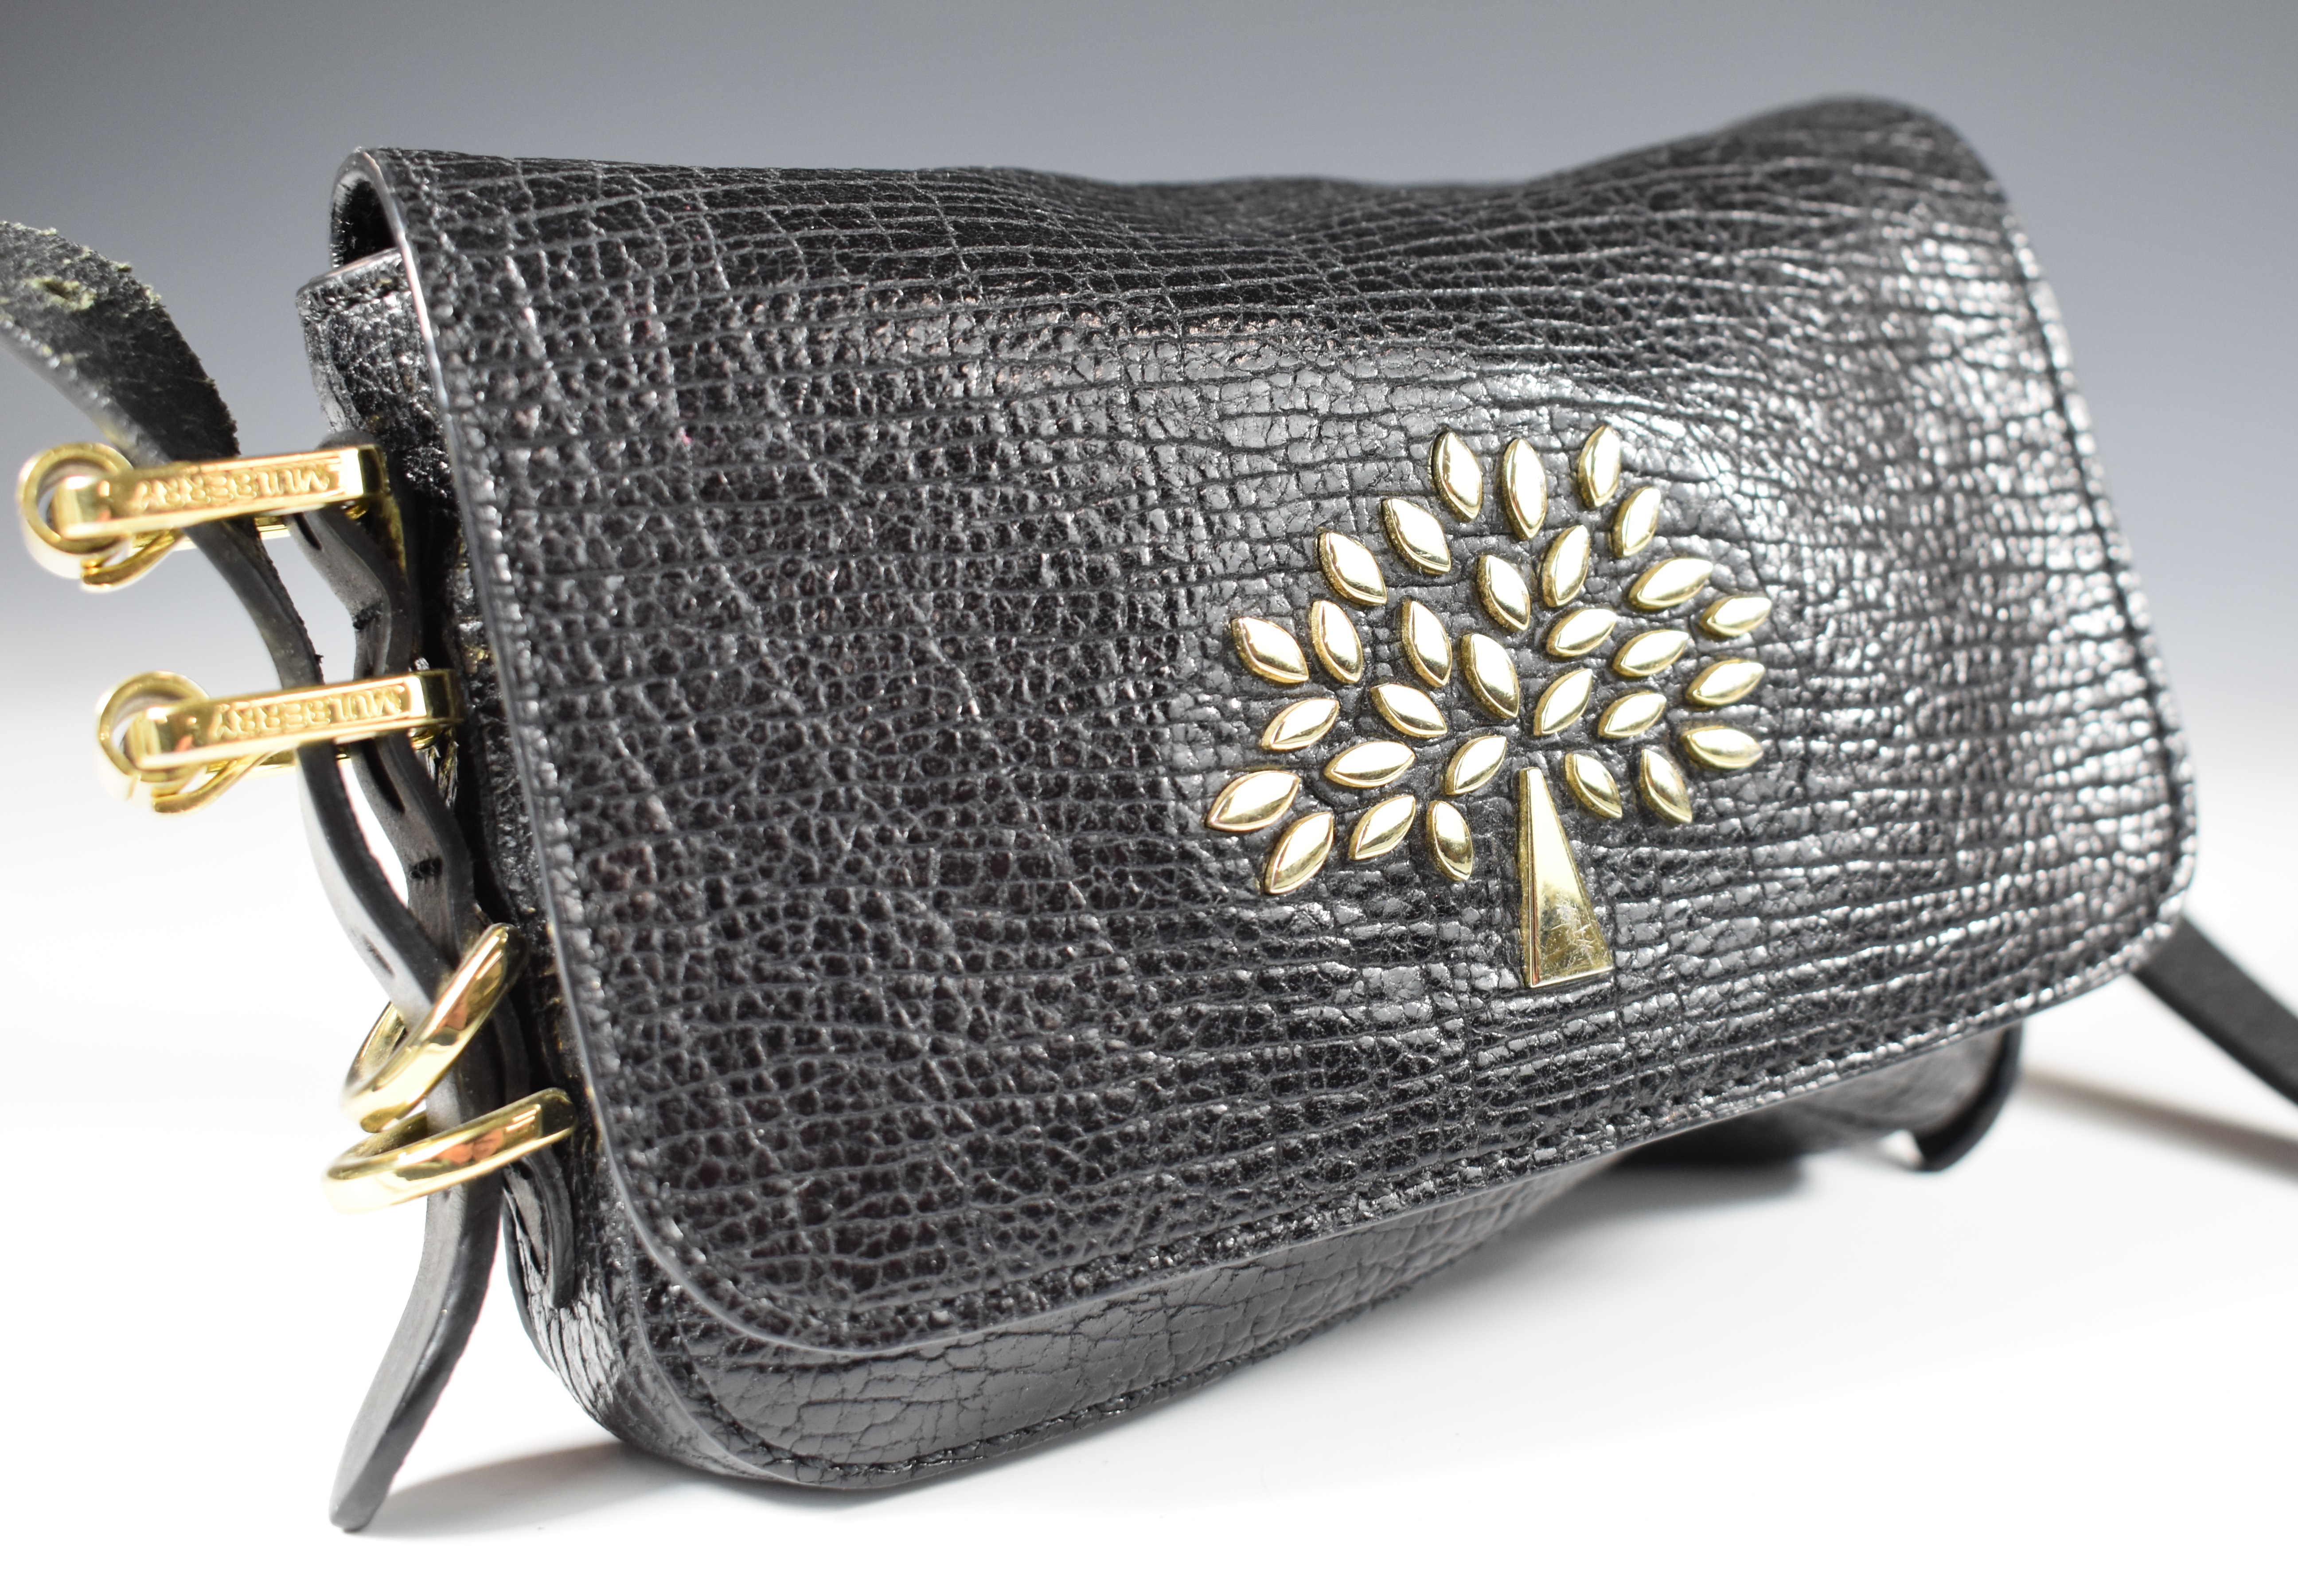 Mulberry Mila Mini handbag in black leather with gilt metal hardware, with original label, 15 x 10. - Image 3 of 9